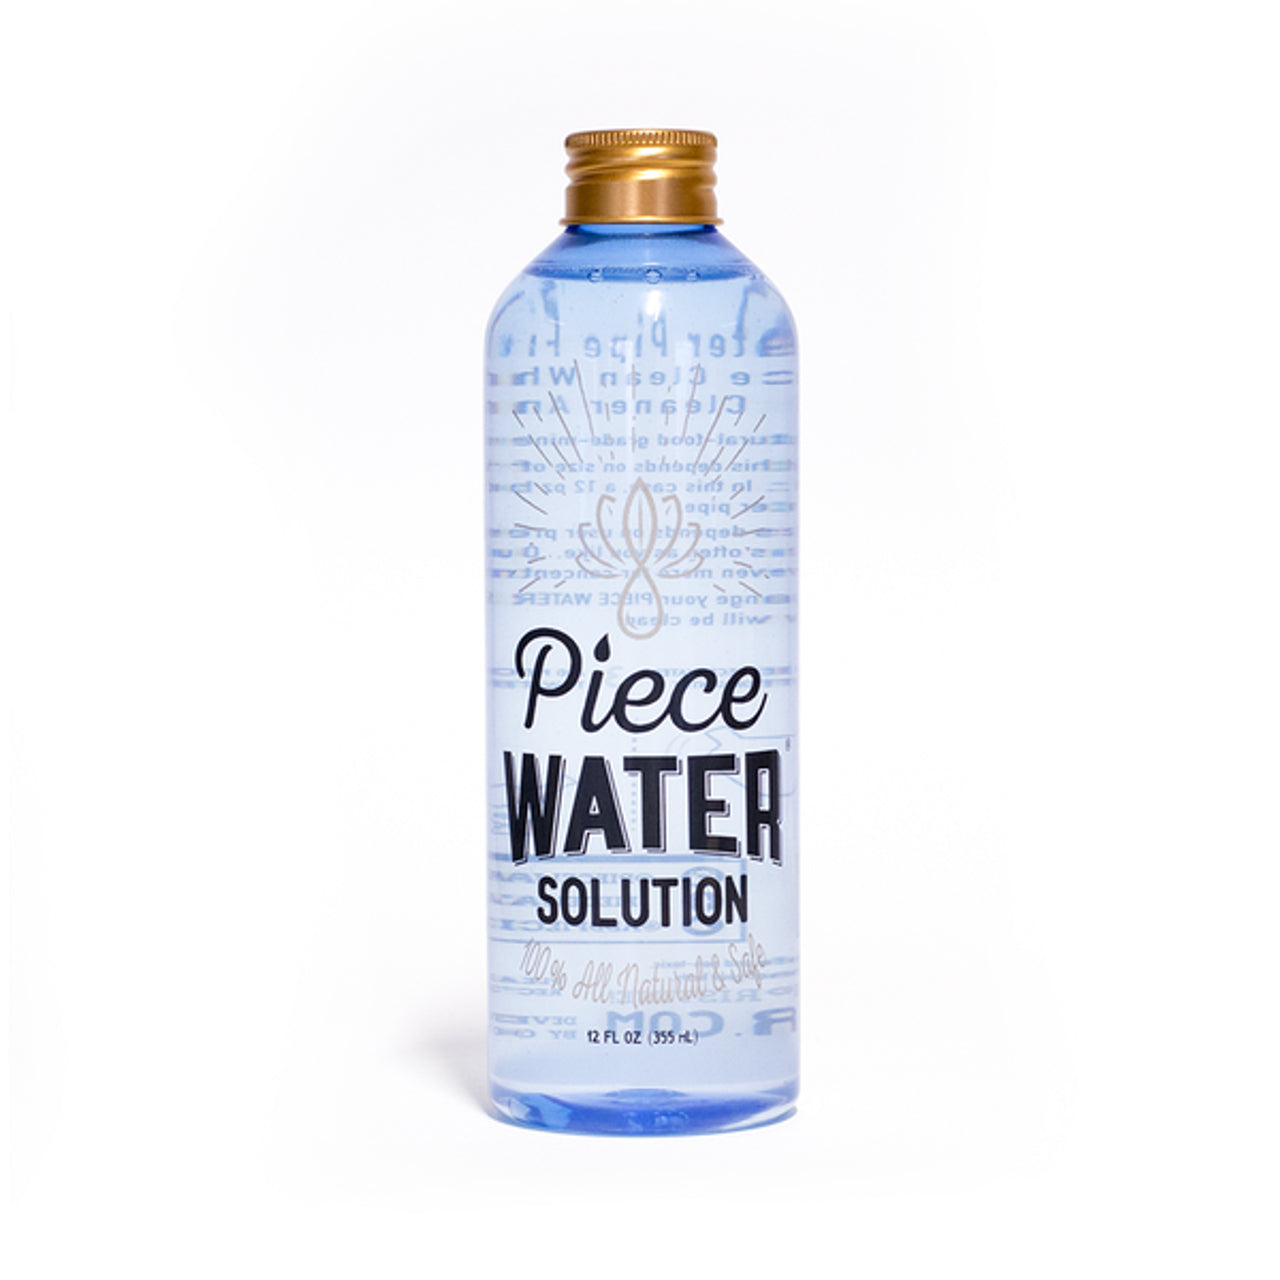 Buy Piece Water Pipe Cleaning Solution - Wick and Wire Co Melbourne Vape Shop, Victoria Australia